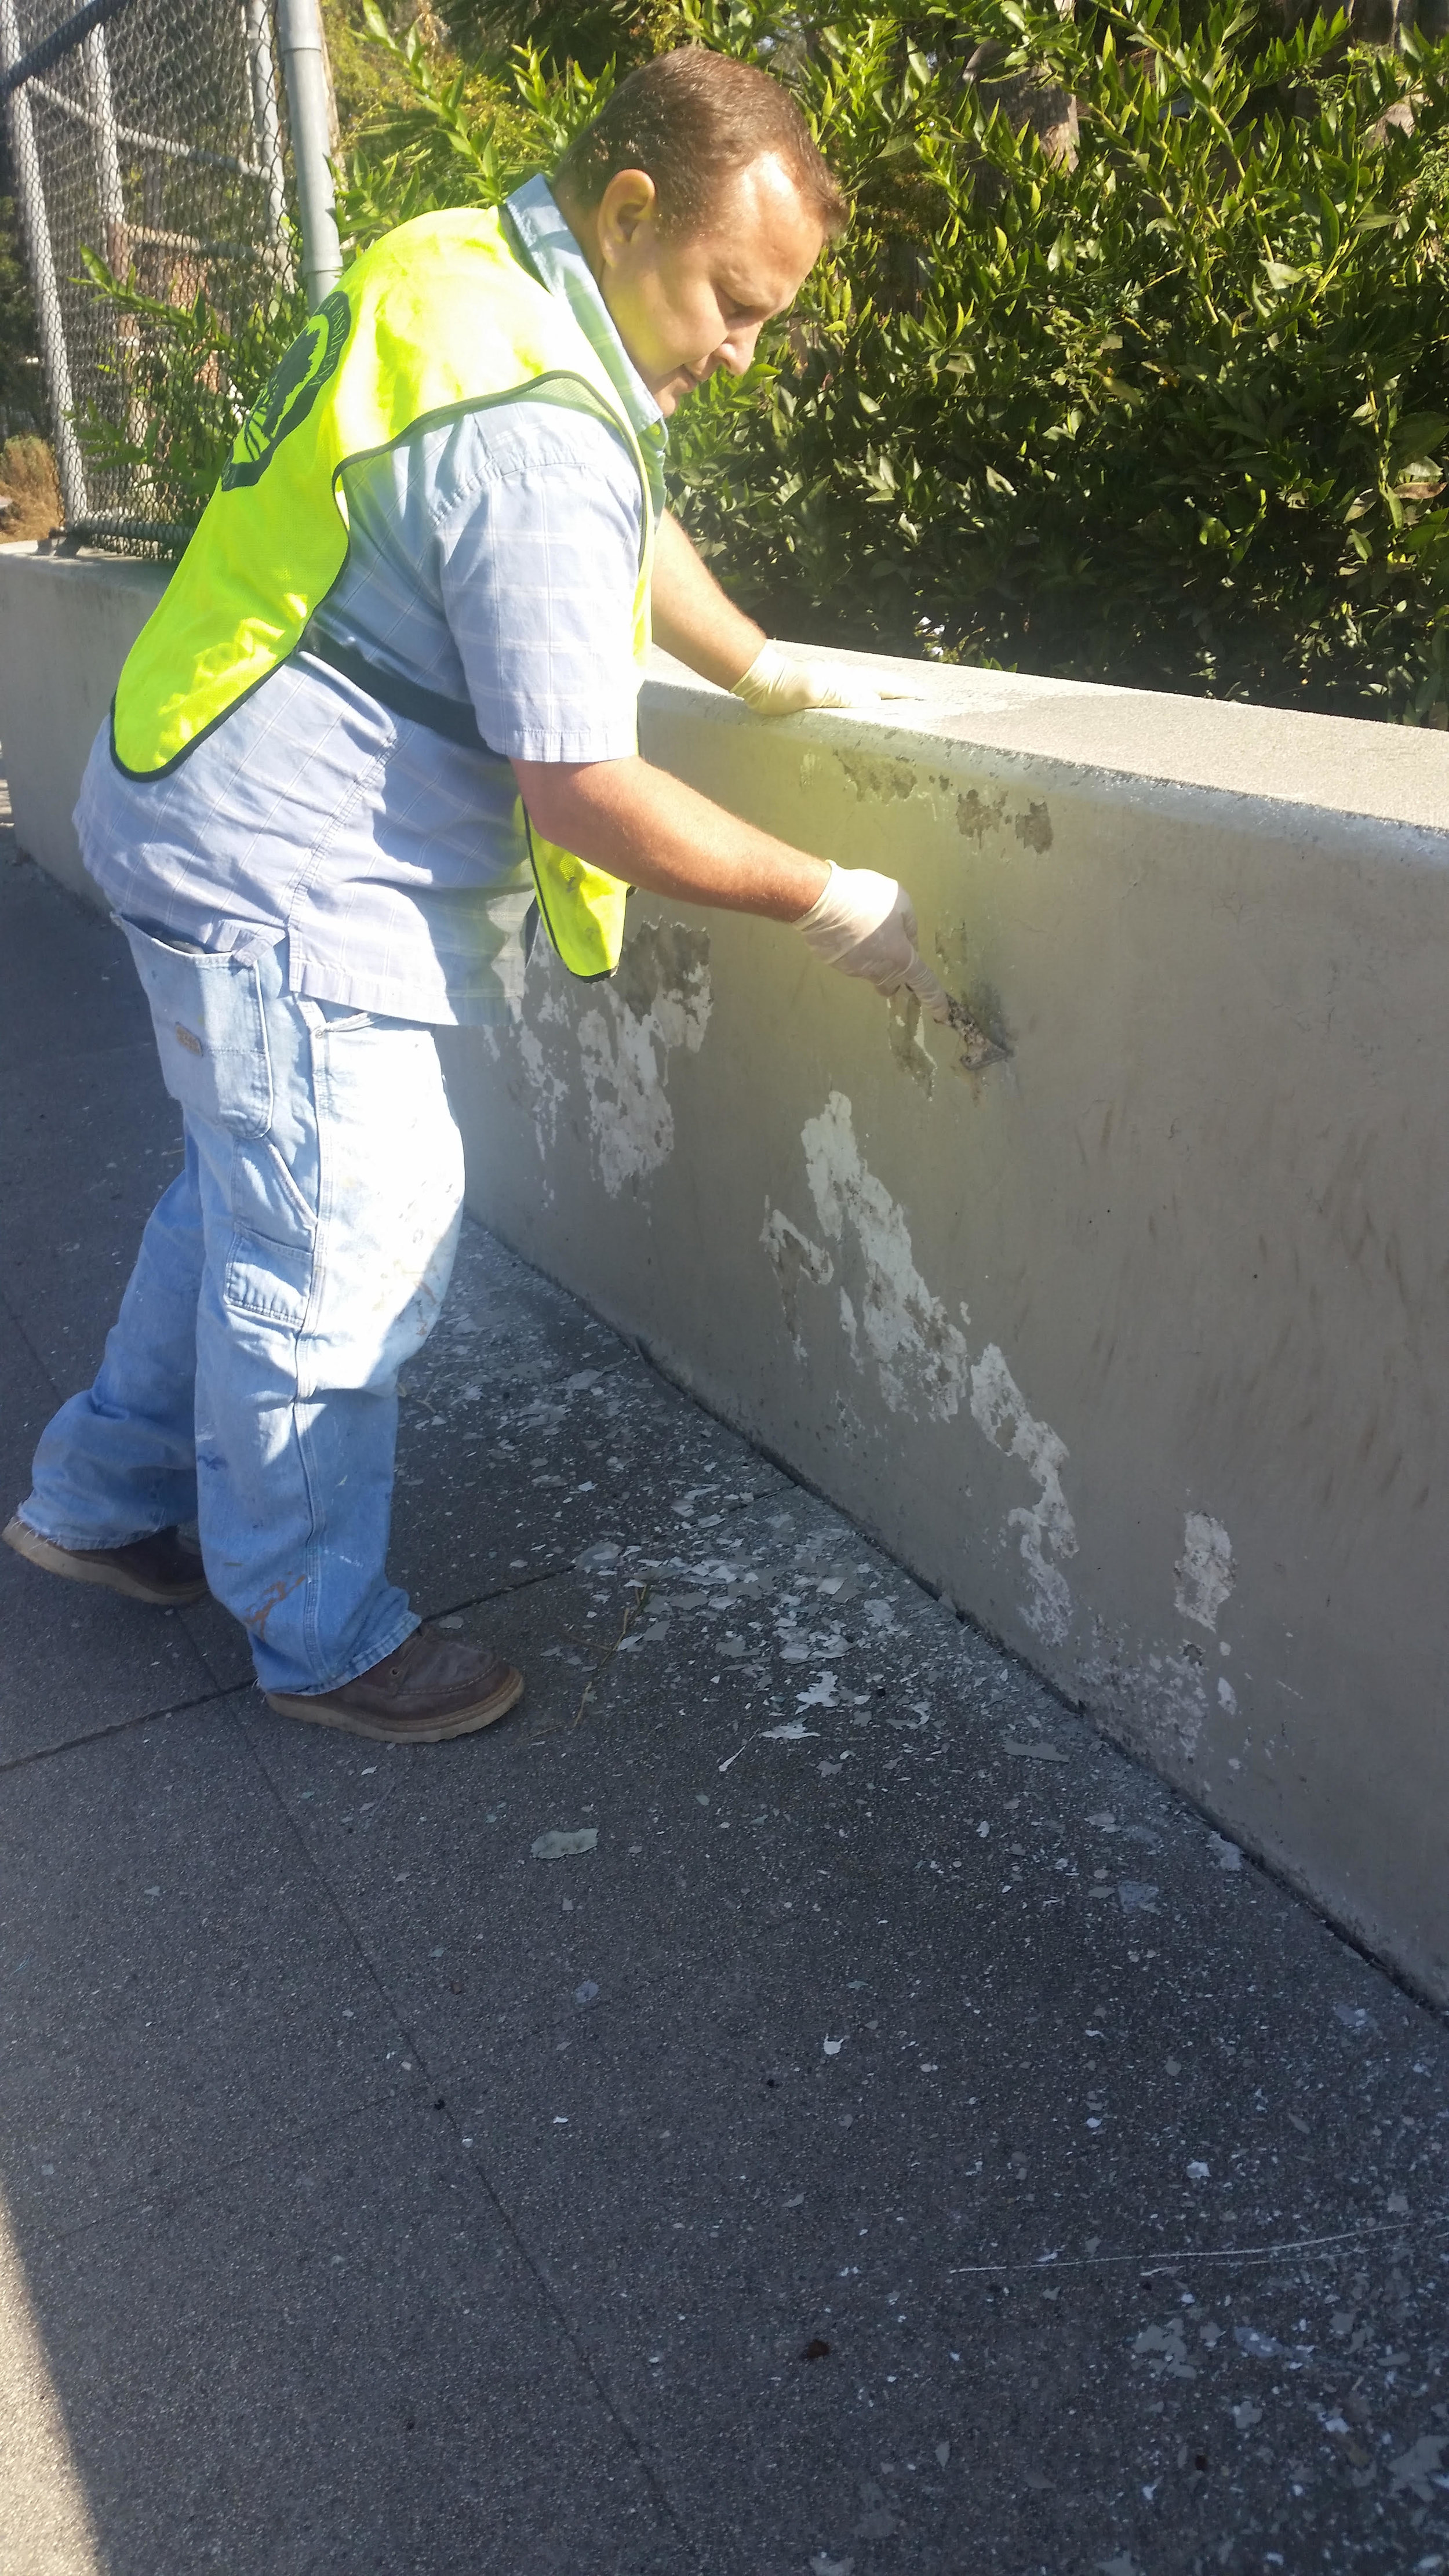 Painting the overpass